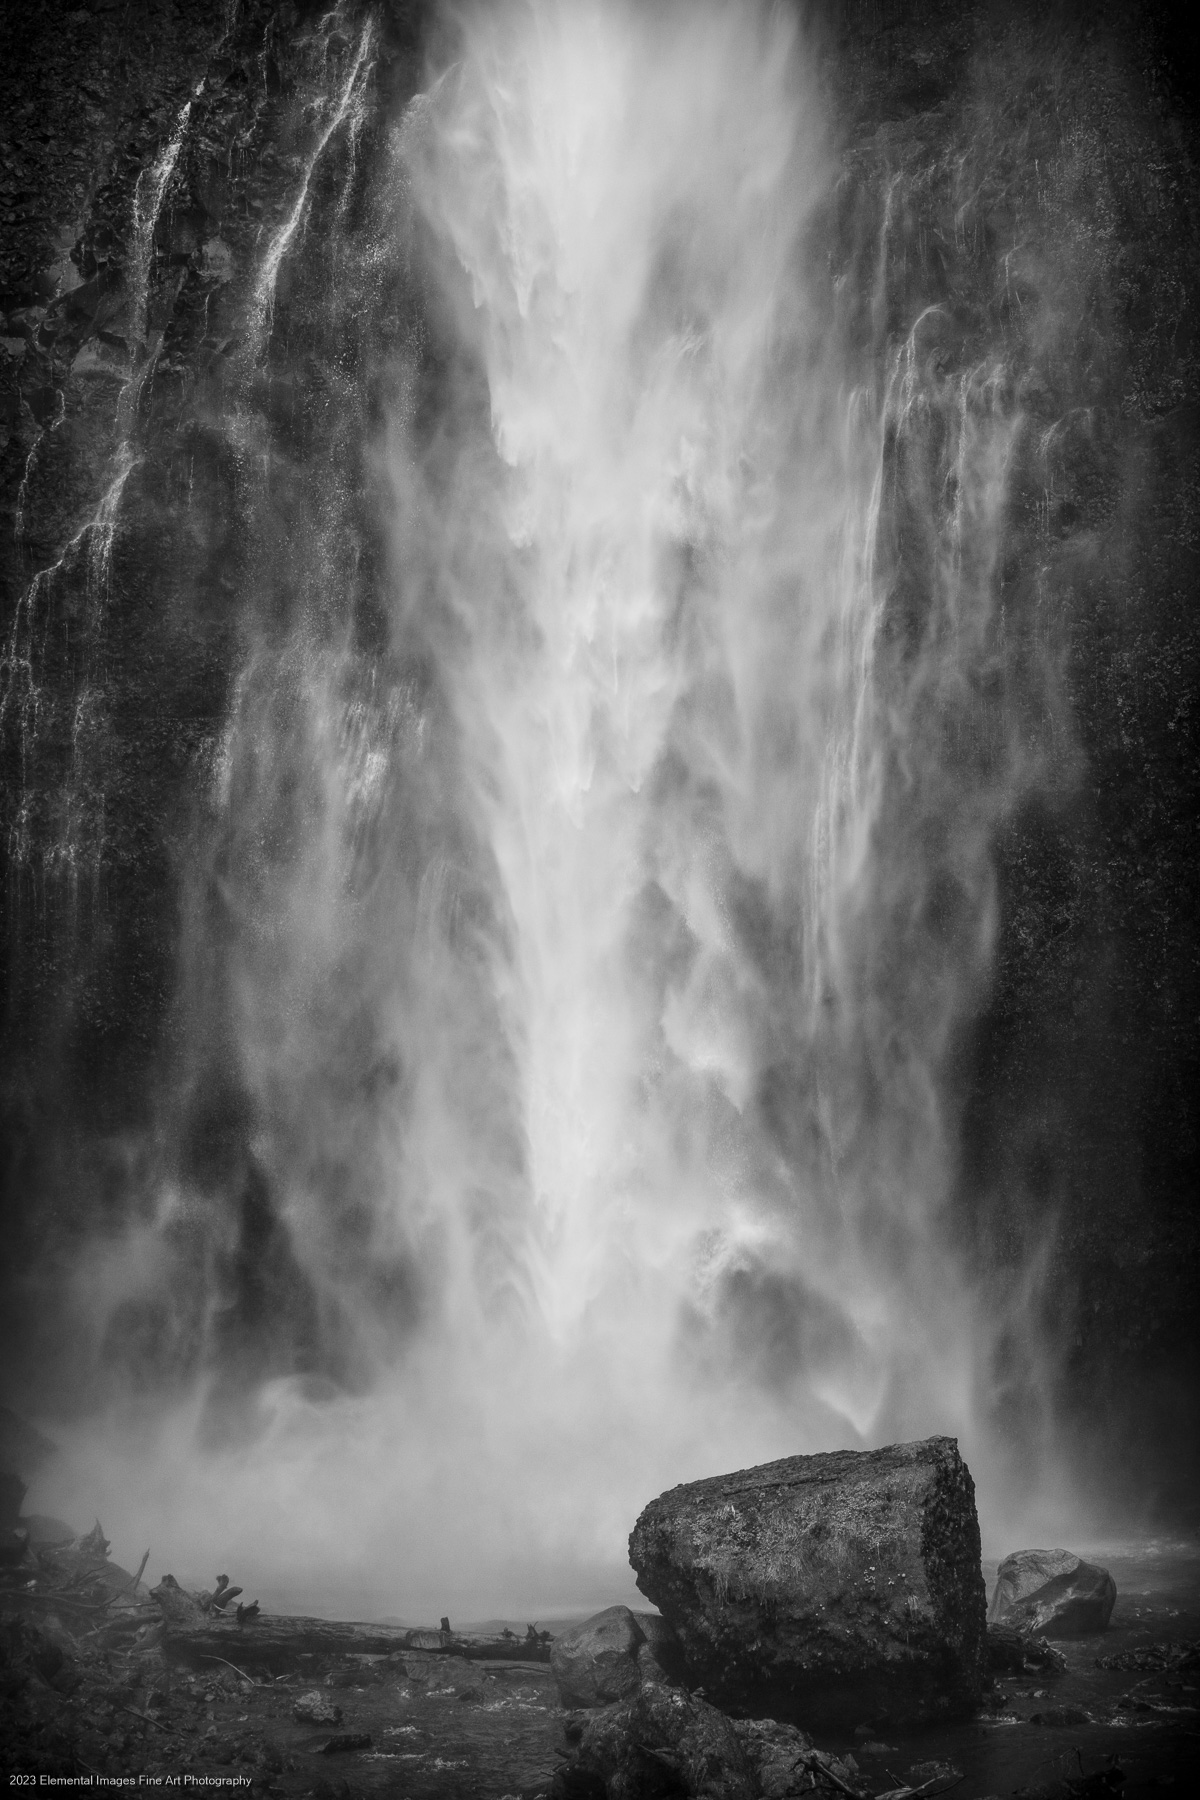 Waterfalls Study 35 | Columbia River Gorge National Scenic Area | OR | USA - © 2023 Elemental Images Fine Art Photography - All Rights Reserved Worldwide